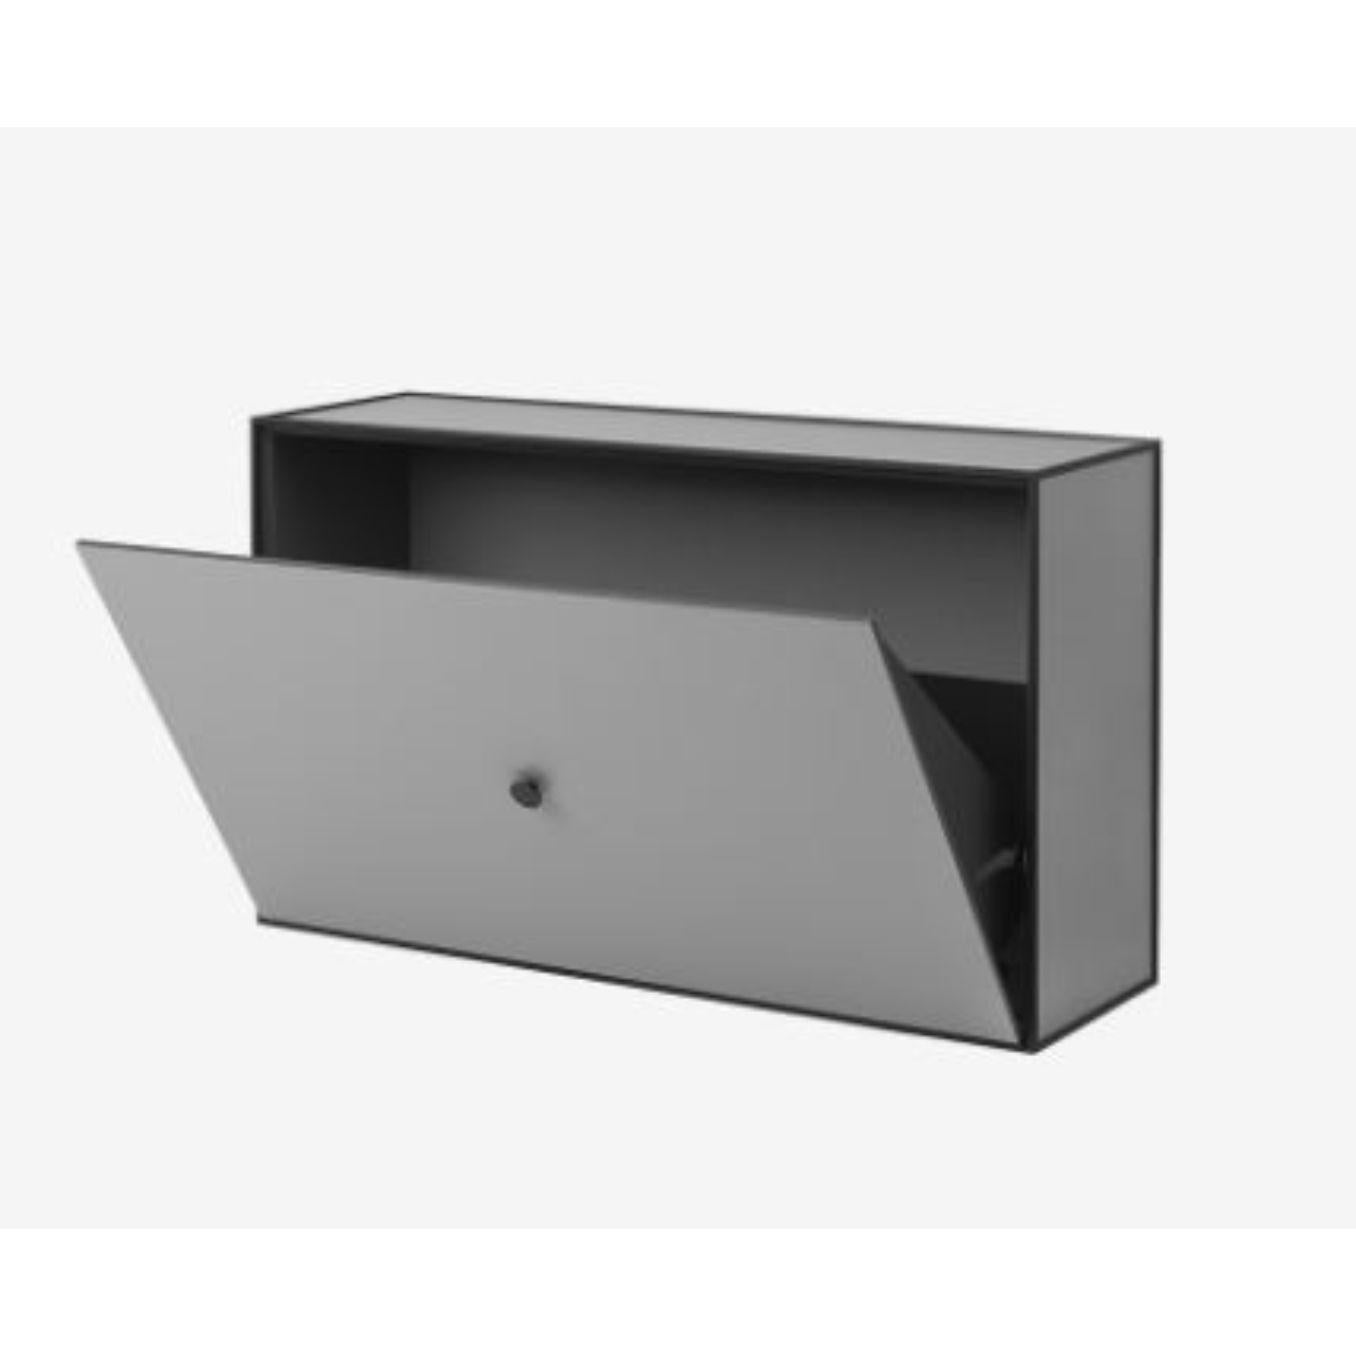 Dark grey frame shoe cabinet by Lassen
Dimensions: D 70 x W 21 x H 42 cm 
Materials: finér, melamin, melamine, metal, veneer
Also available in different colours and dimensions. 
Weight: 20 Kg

By Lassen is a Danish design brand focused on